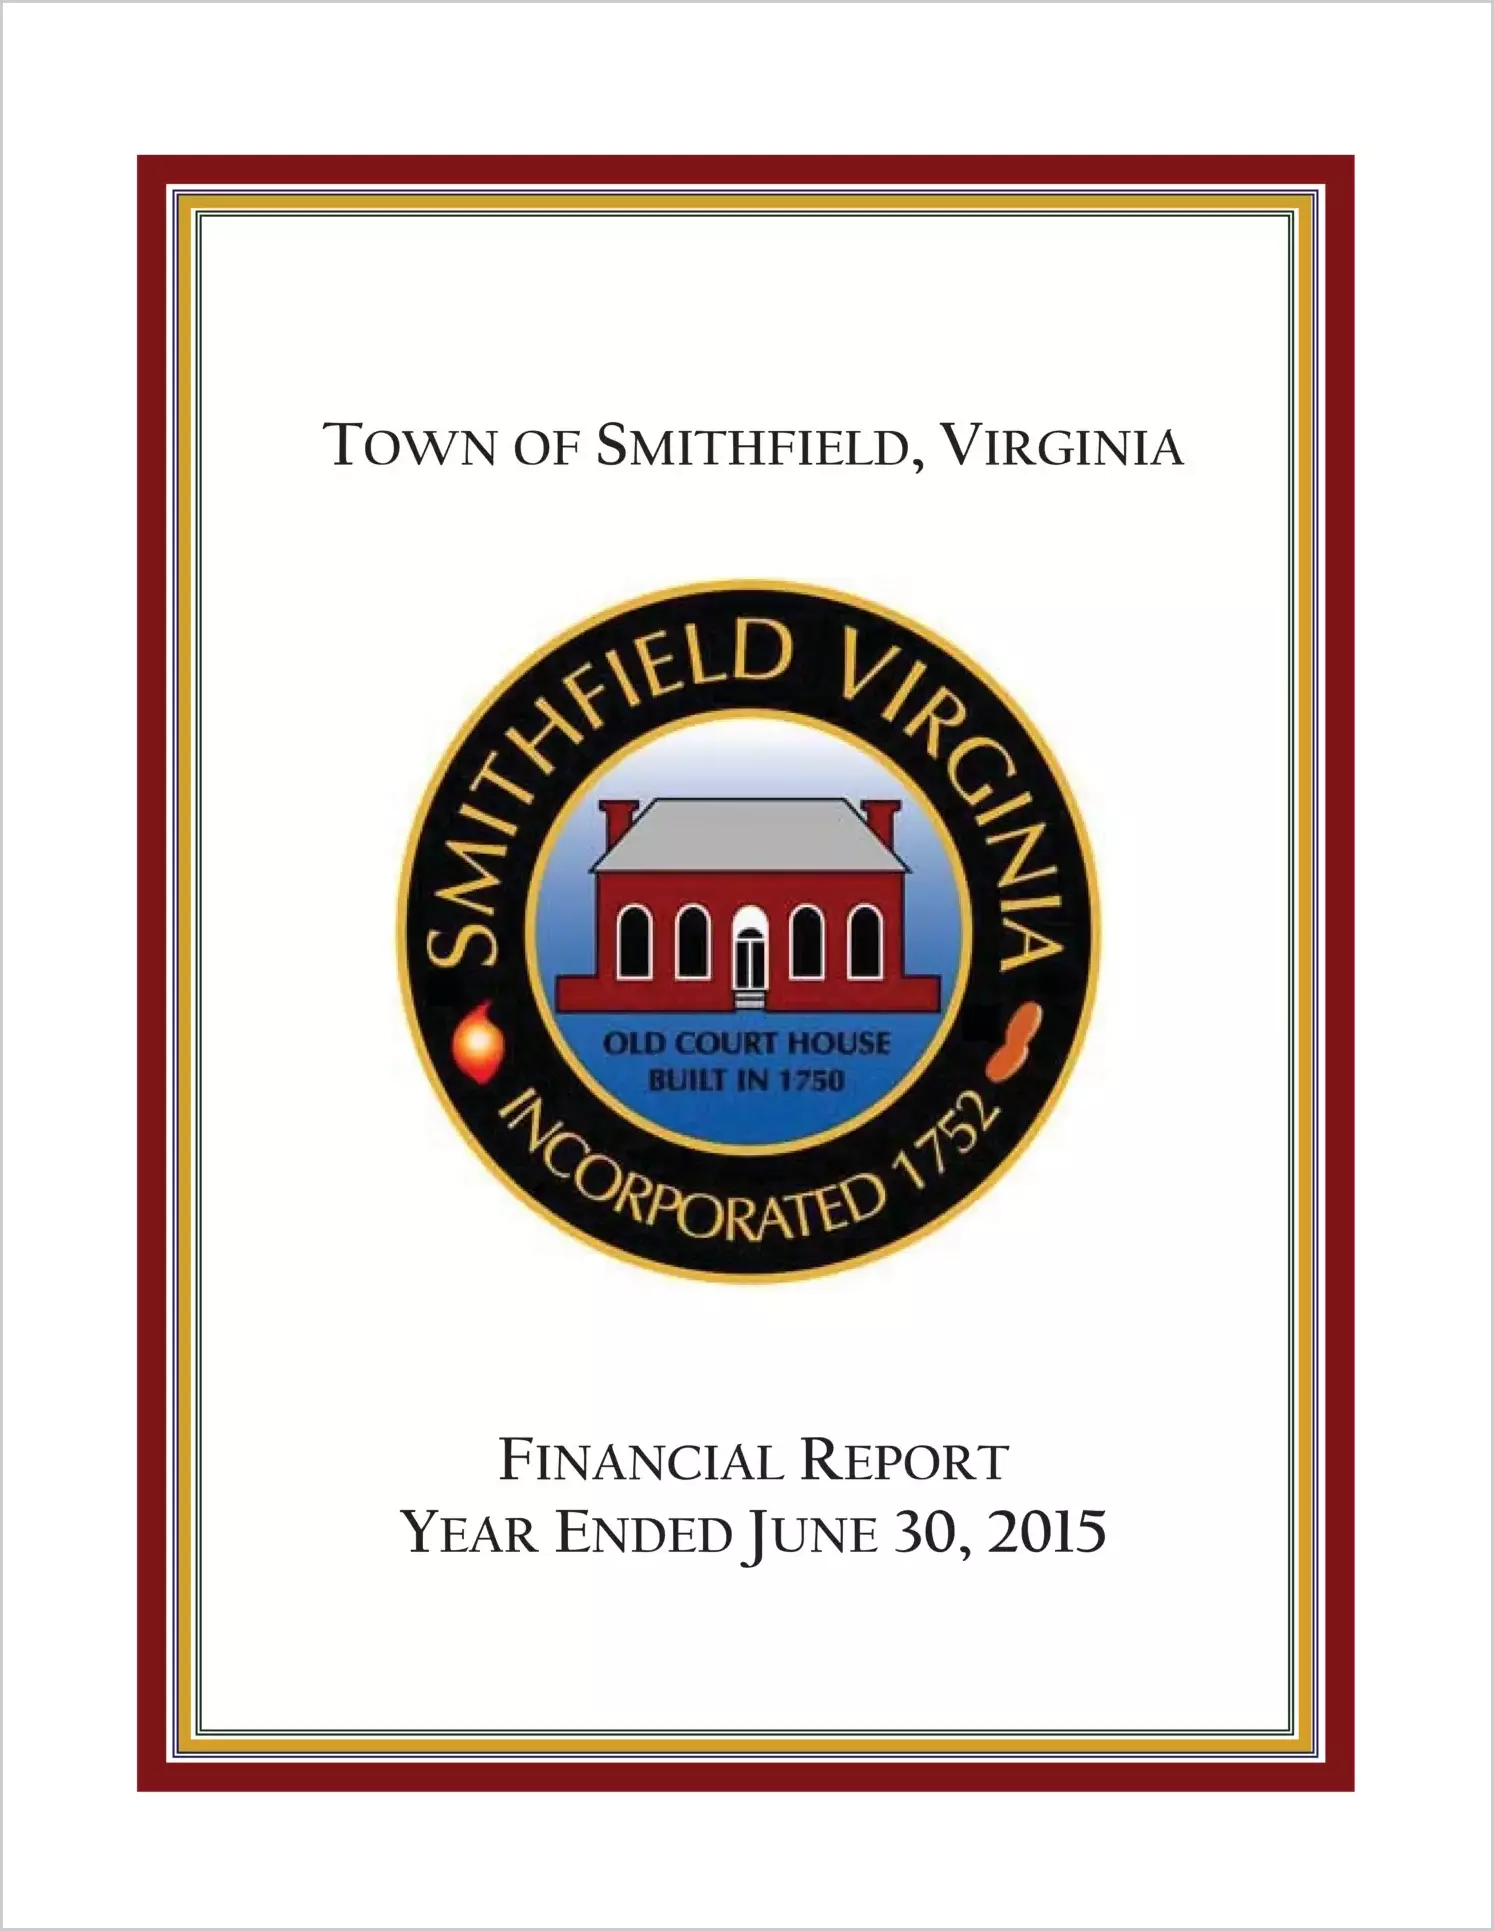 2015 Annual Financial Report for Town of Smithfield